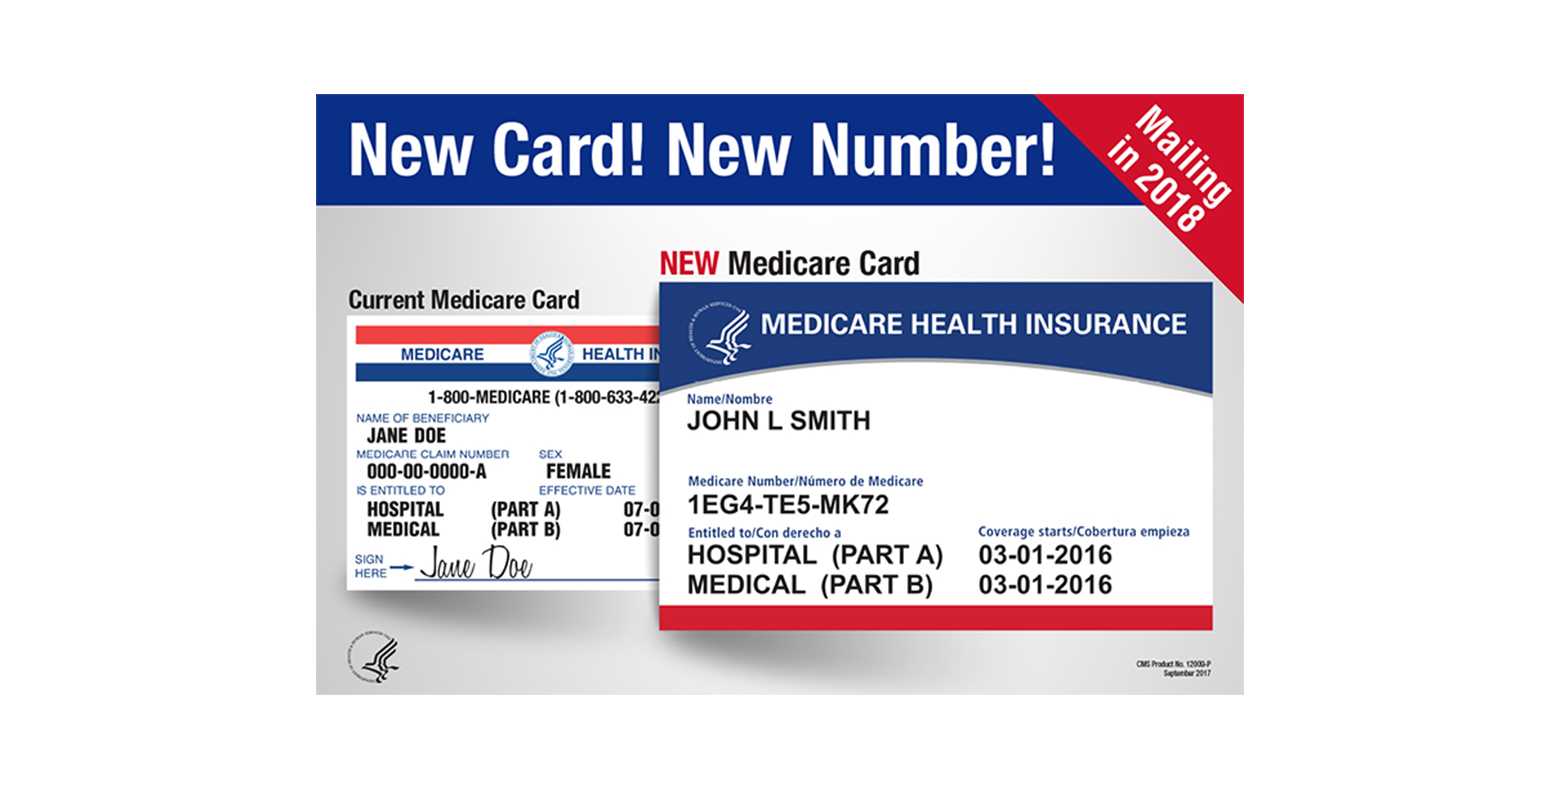 NEW MEDICARE CARDS COMING SOON